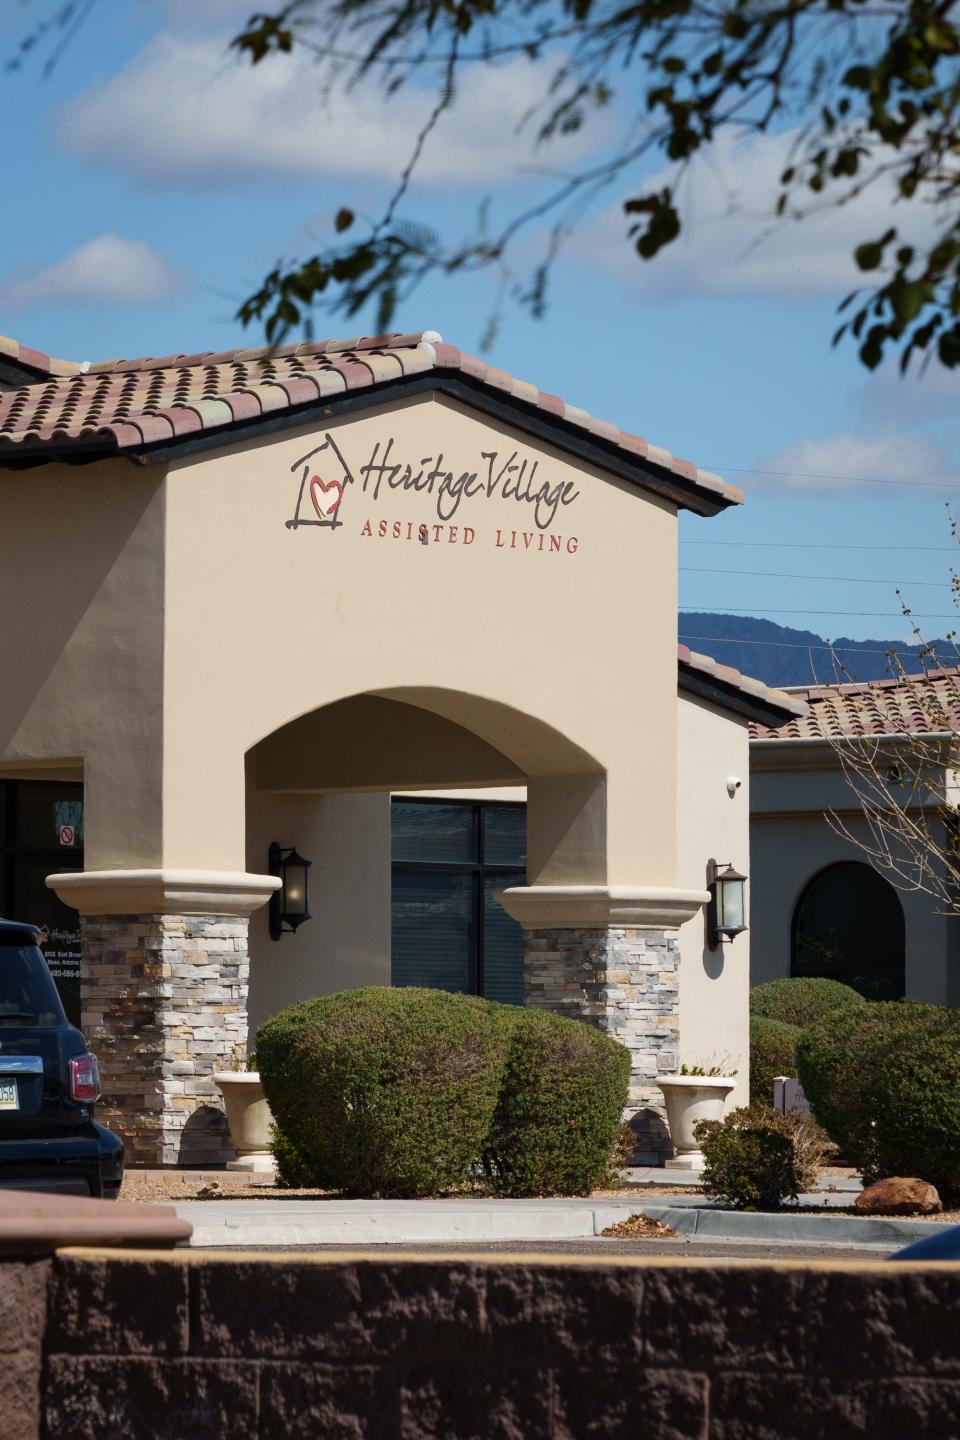 Heritage Village Assisted Living in Mesa, Ariz., photographed on March 3, 2023.